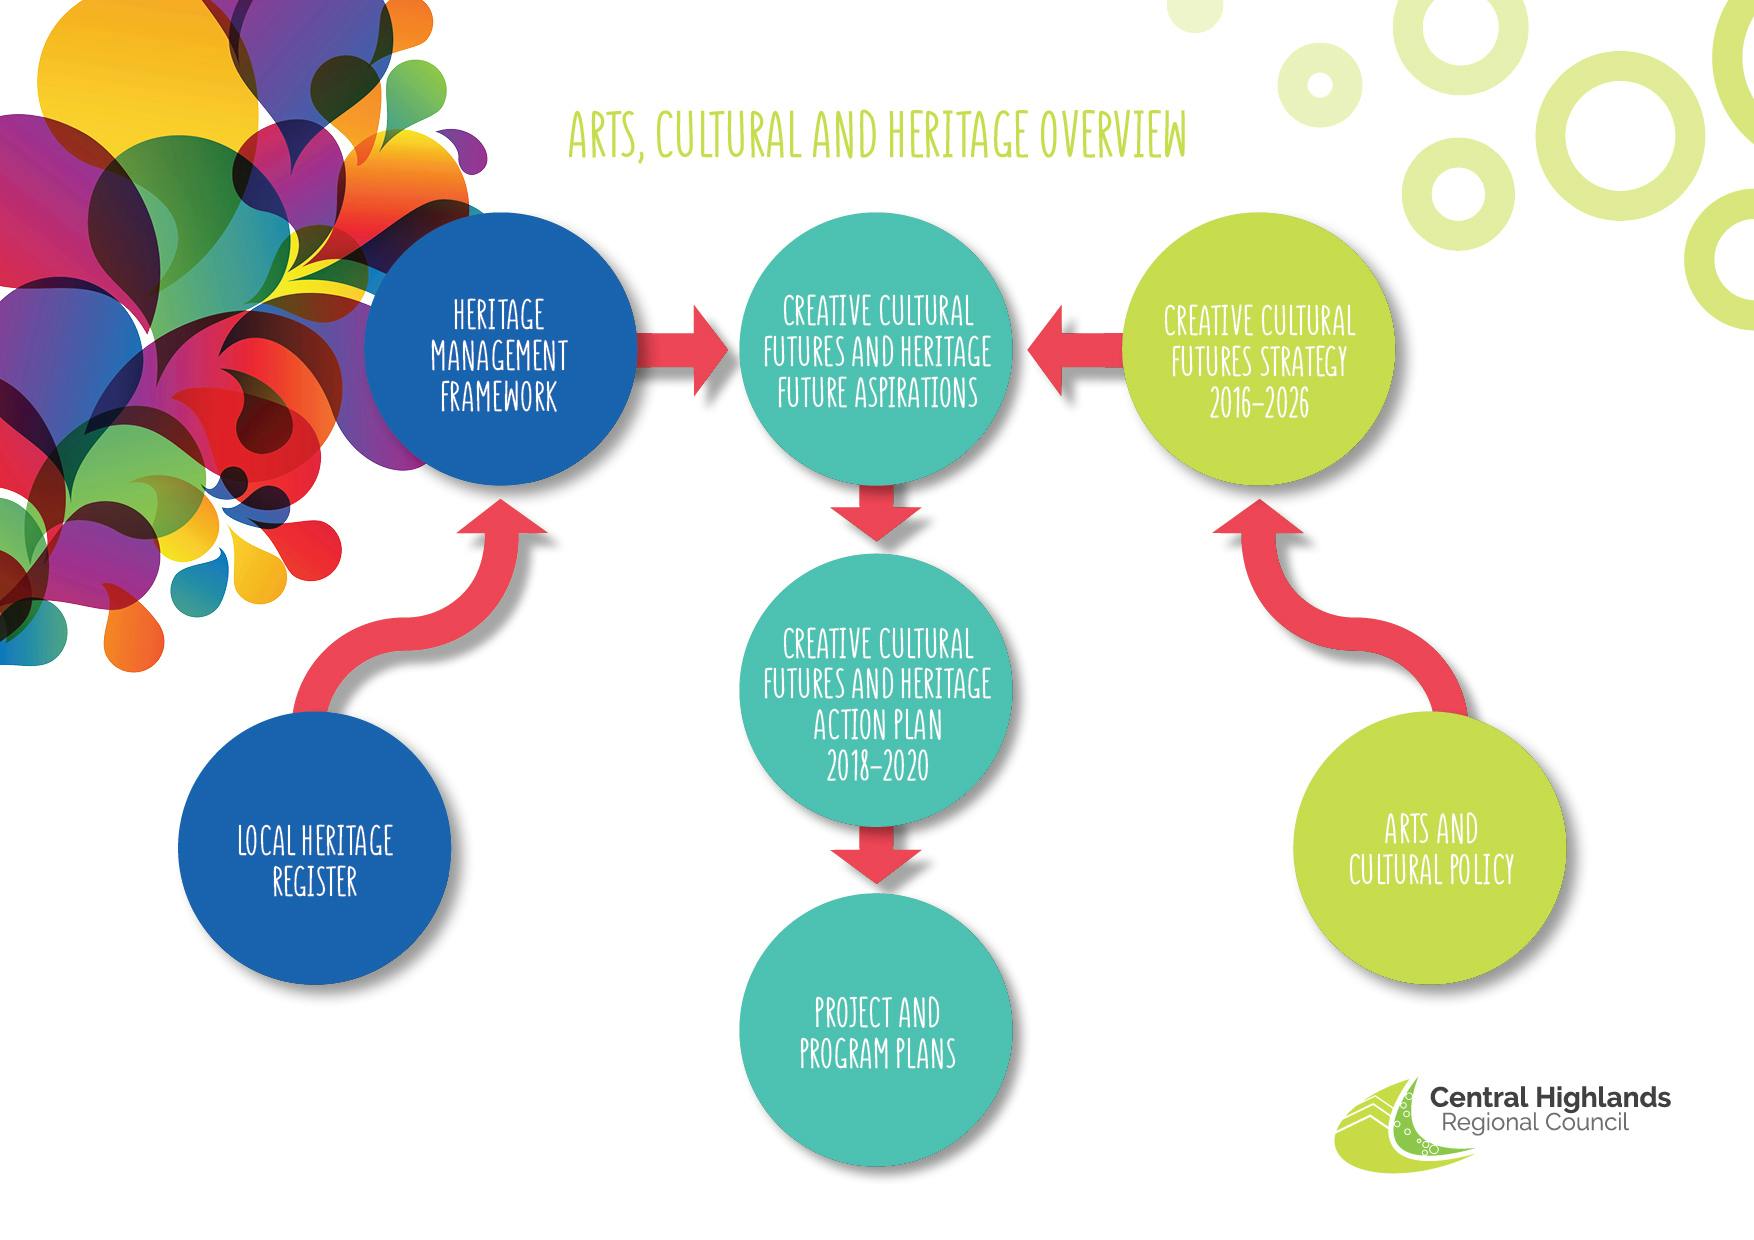 Arts, cultural and heritage strategic documents 